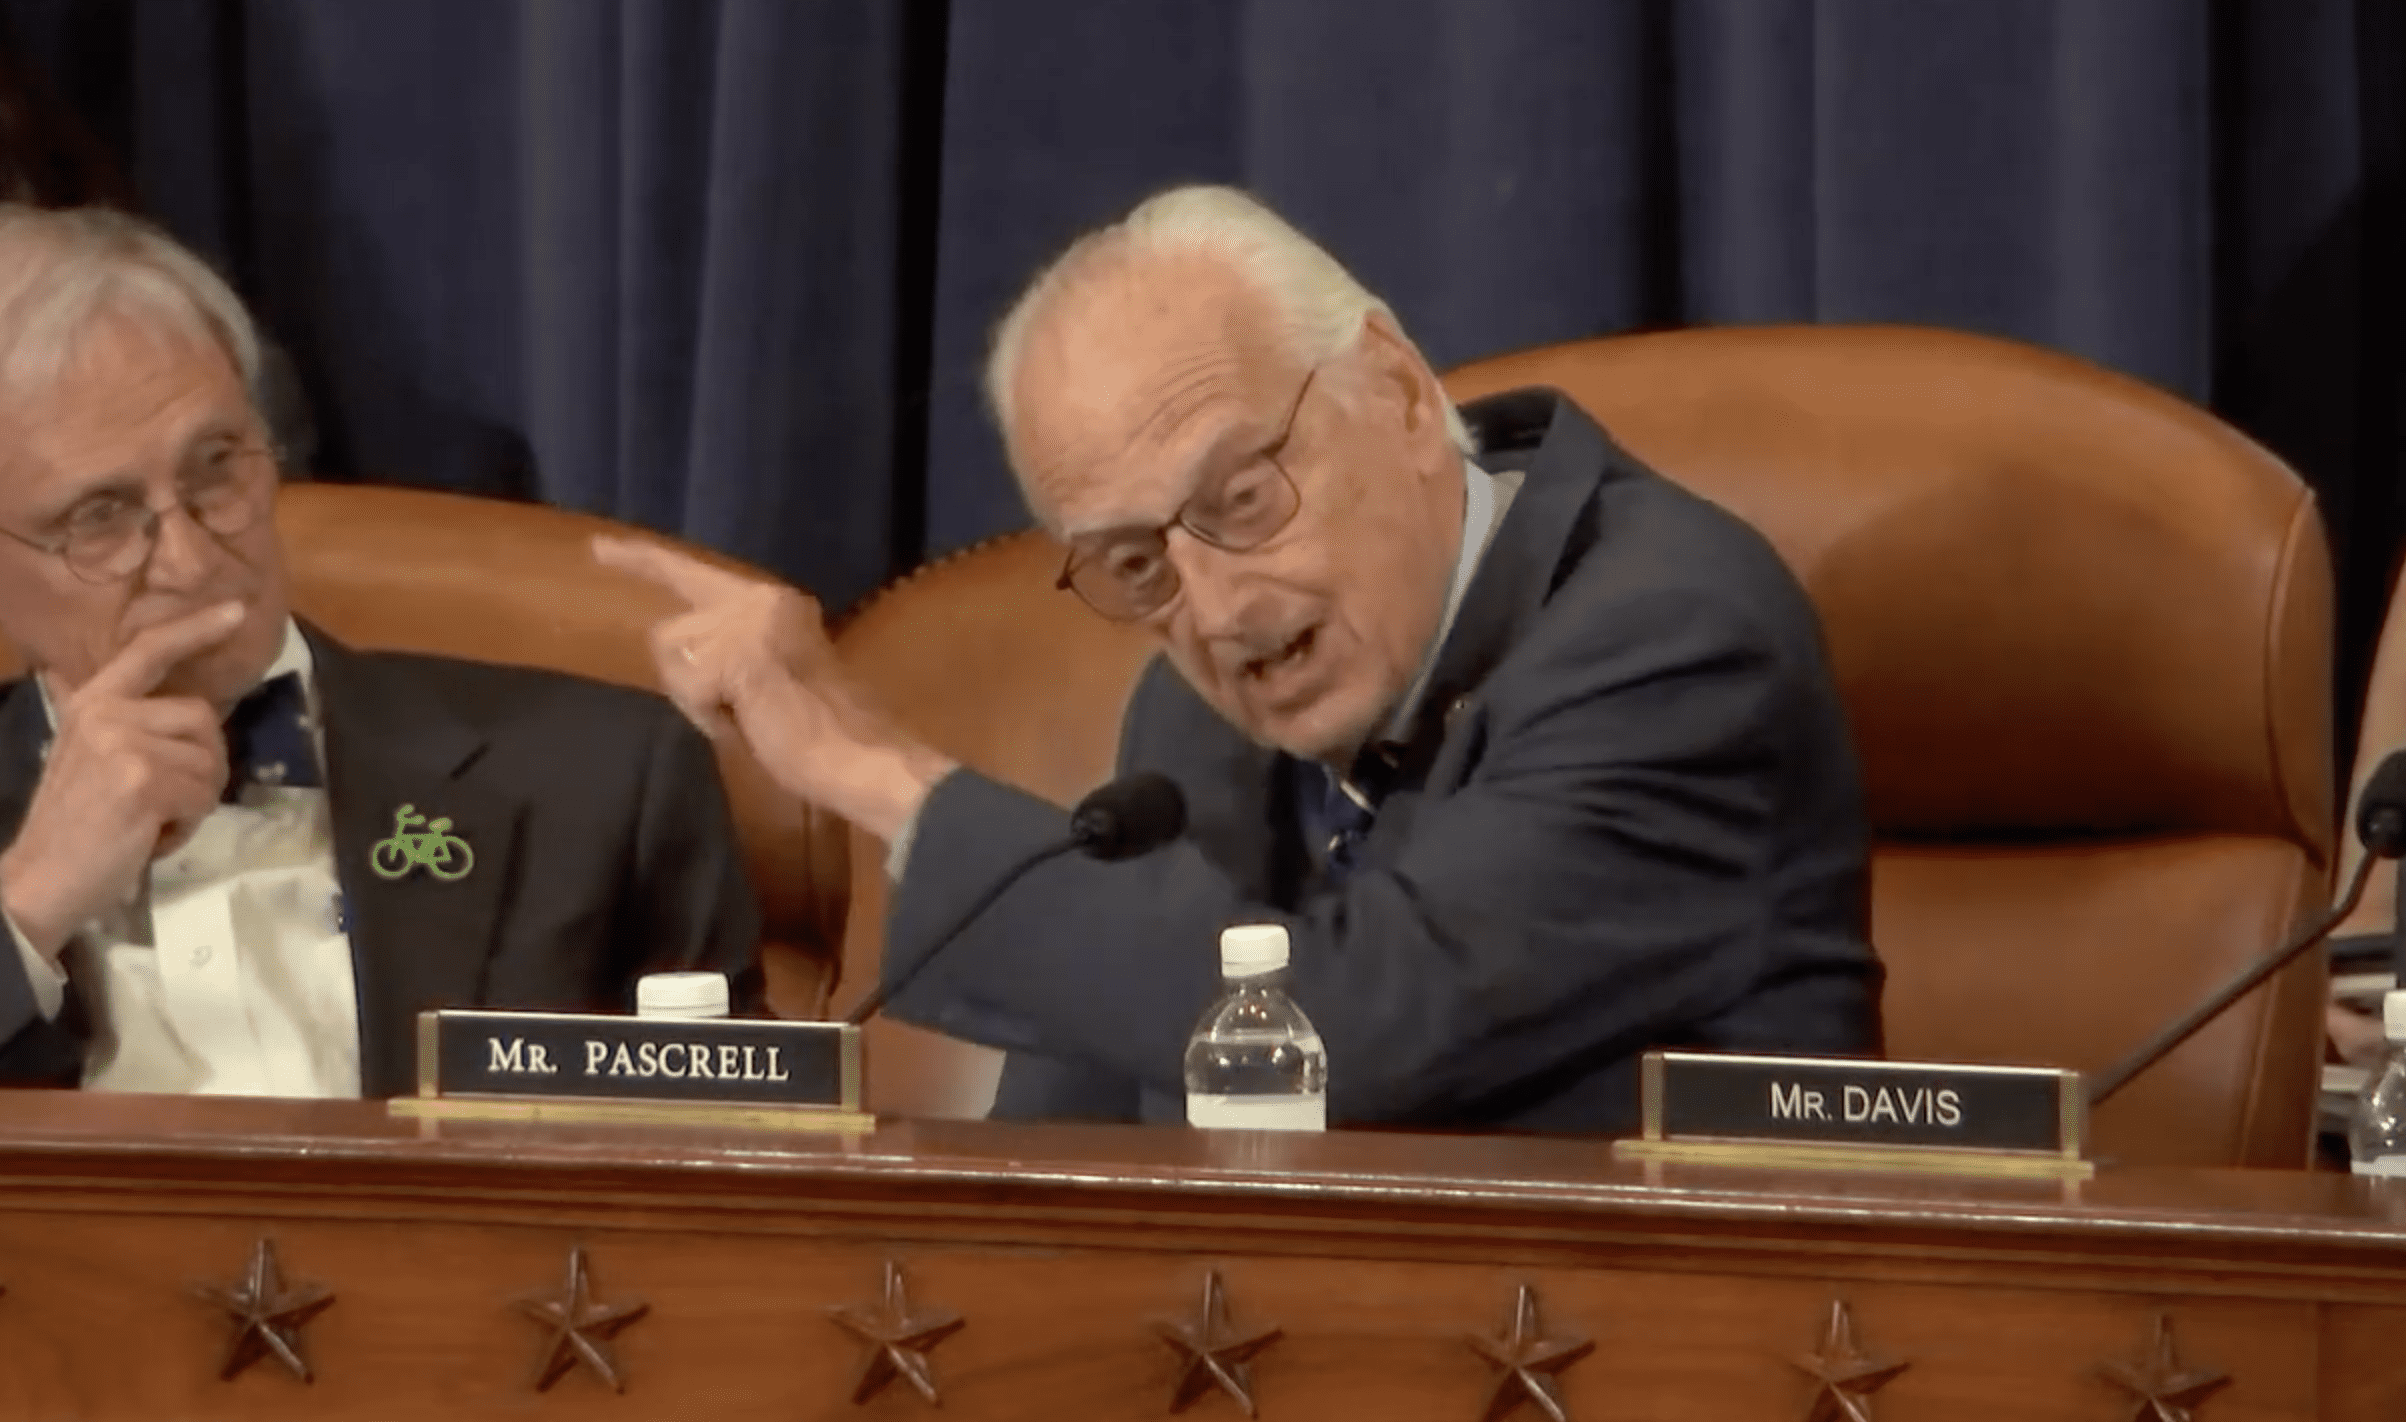 I Testified Before Congress And Democrats Only Wanted To Yell At Me About Old Tweets